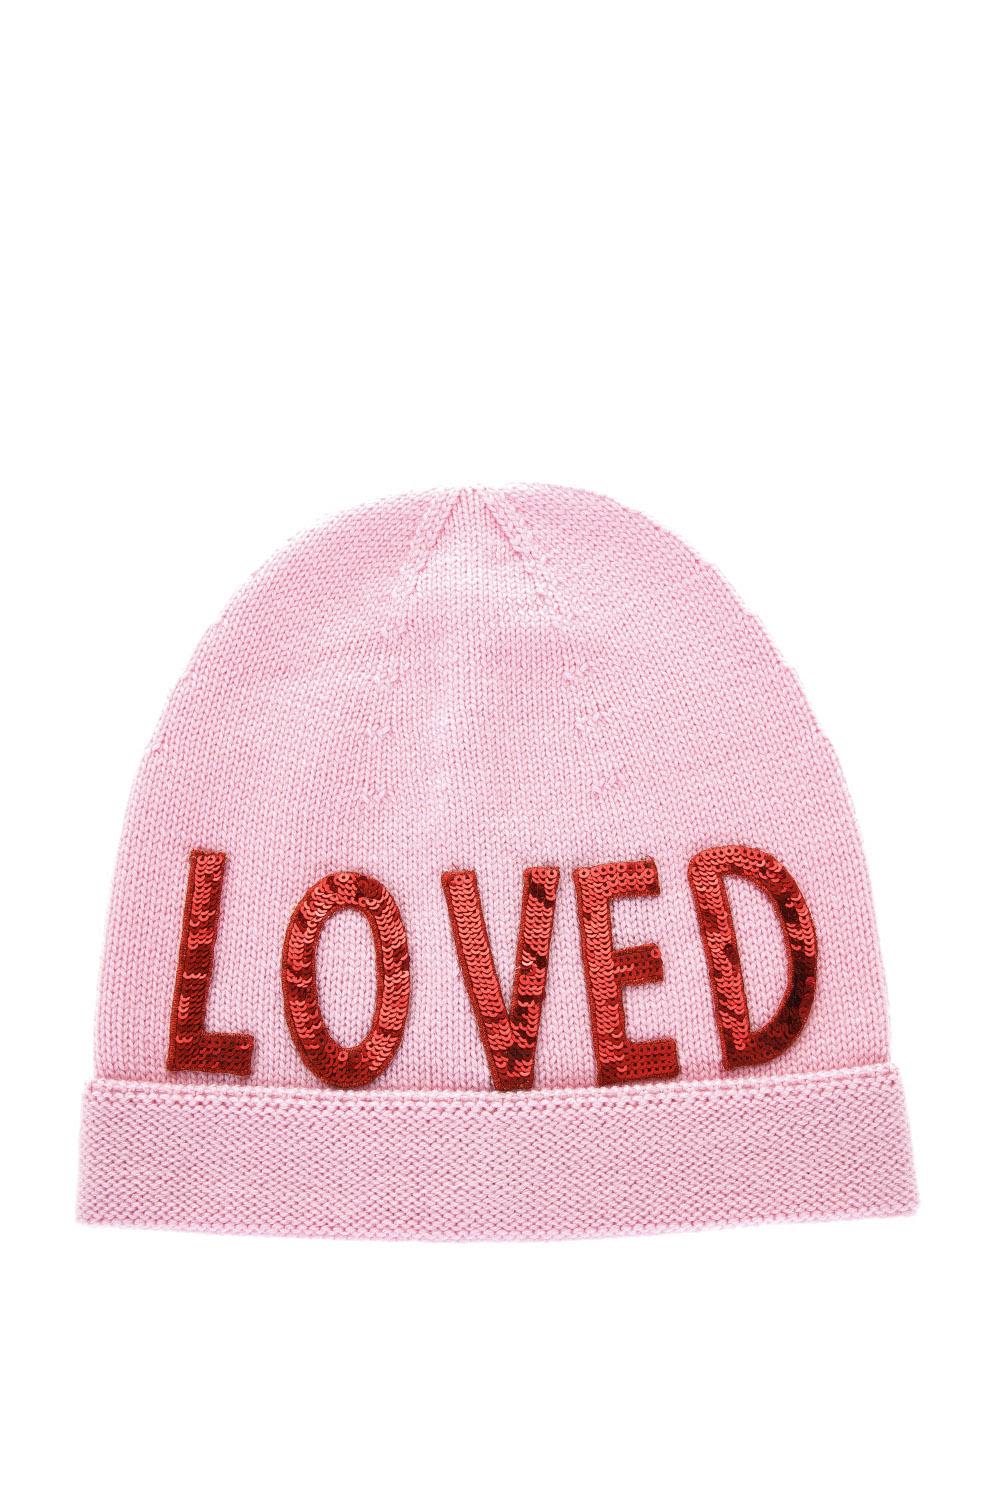 Gucci - Gucci Loved Wool Beanie Hat - Pink/red, Women's Hats | Italist